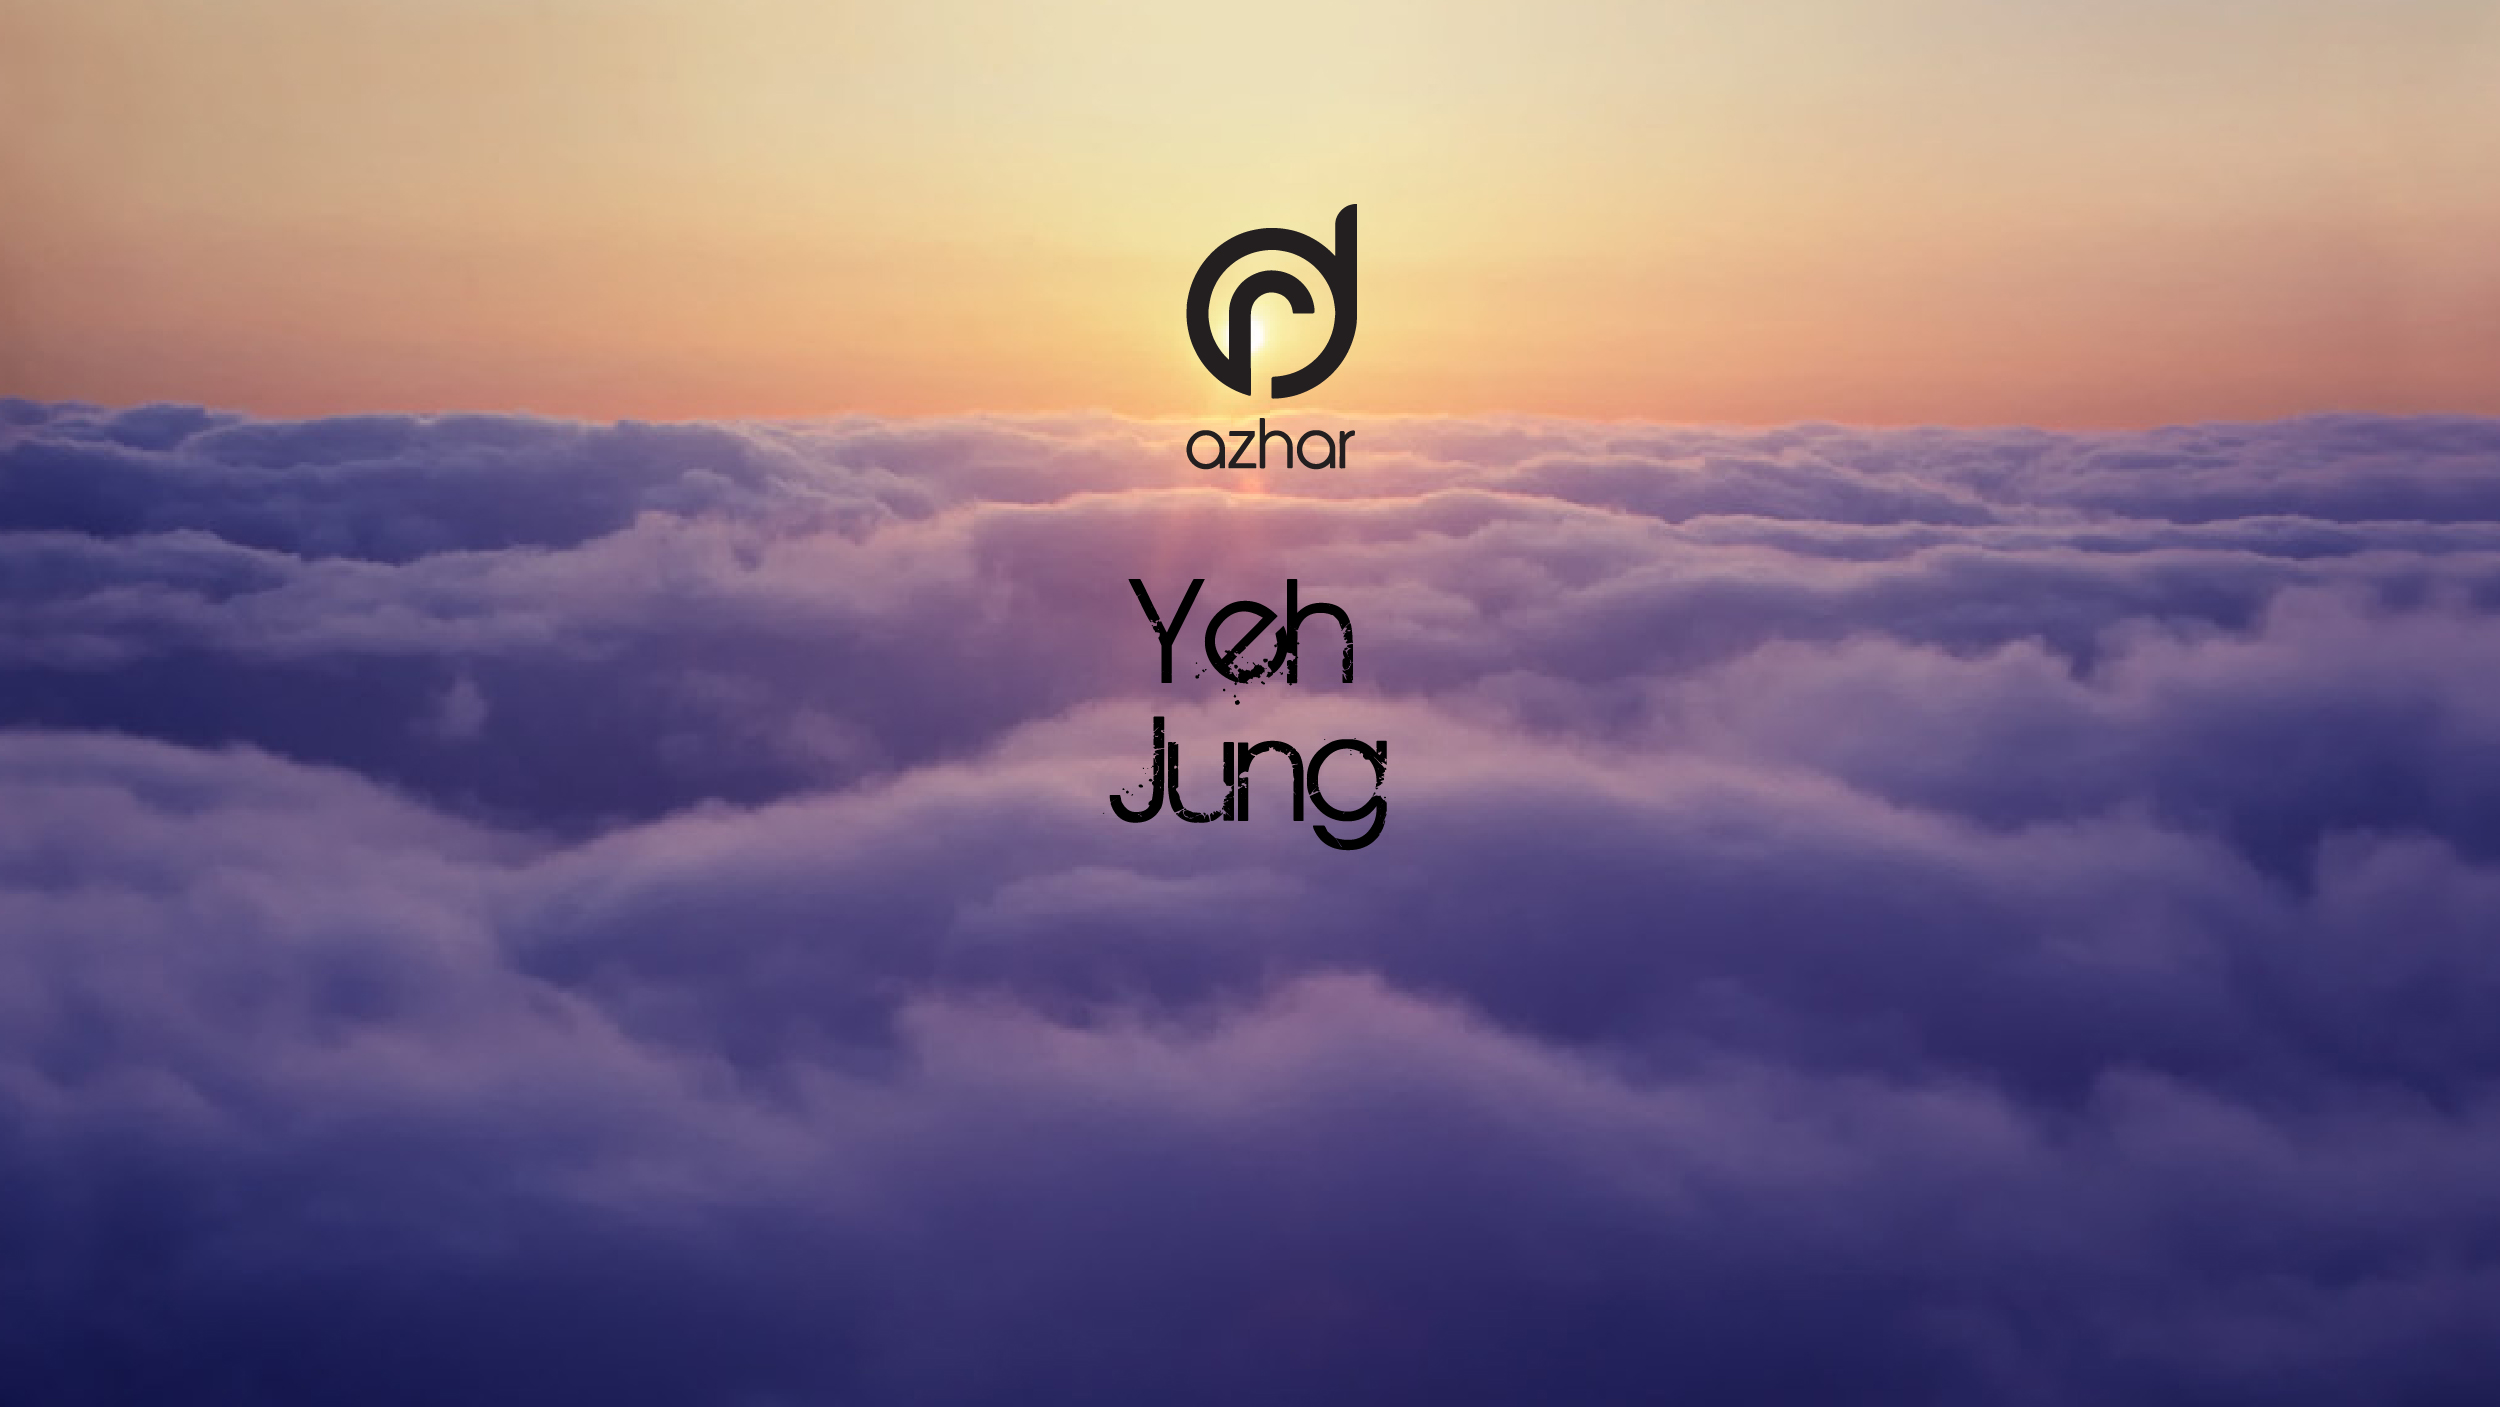 Yeh Jung by Dr. Azhar